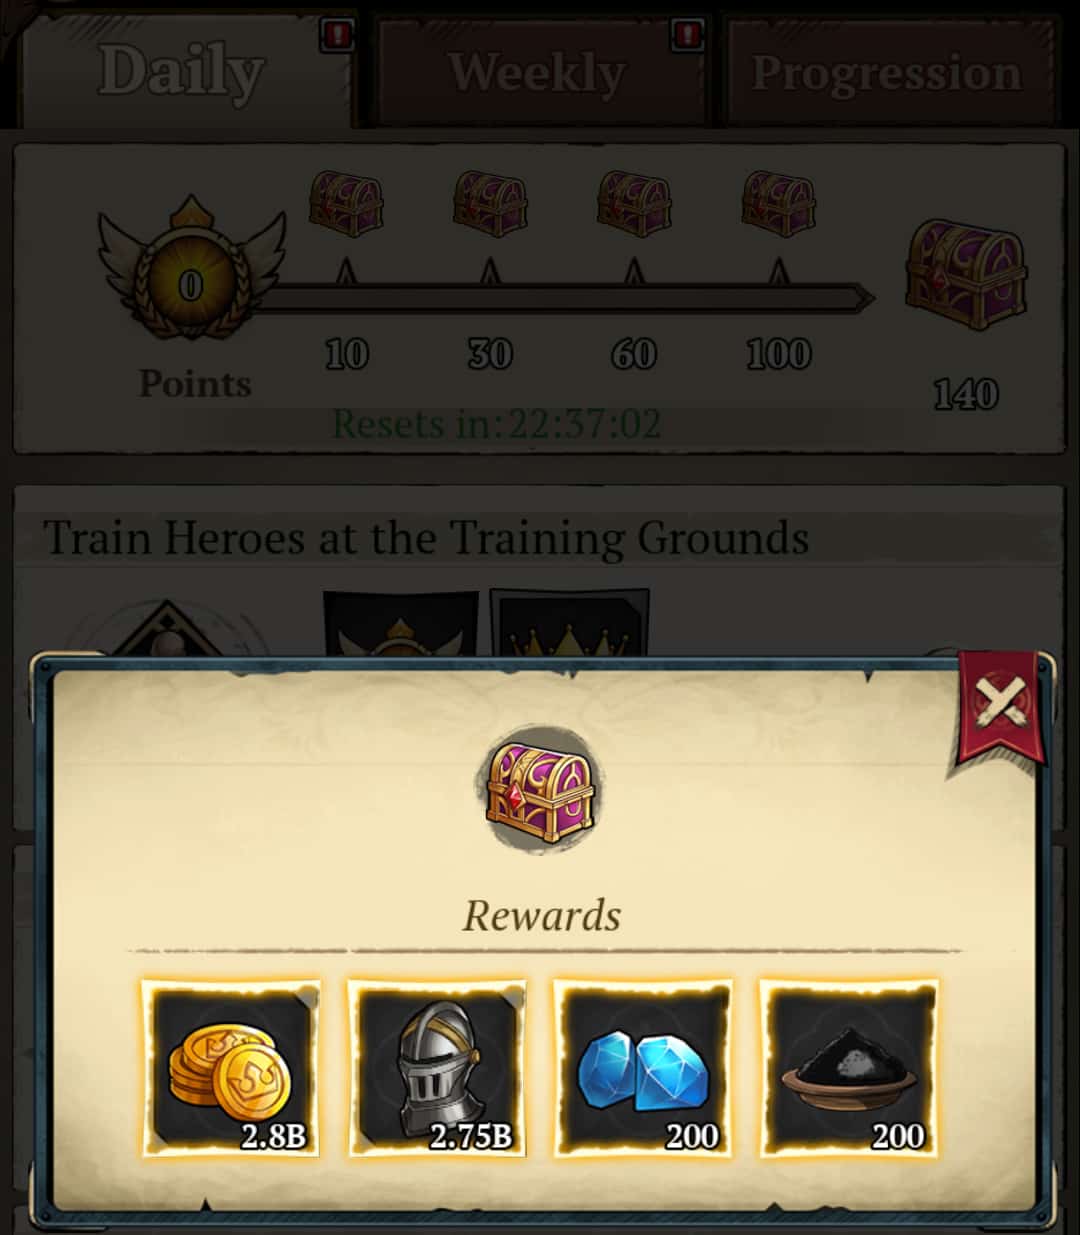 king's throne gameplay - daily rewards for completing quests